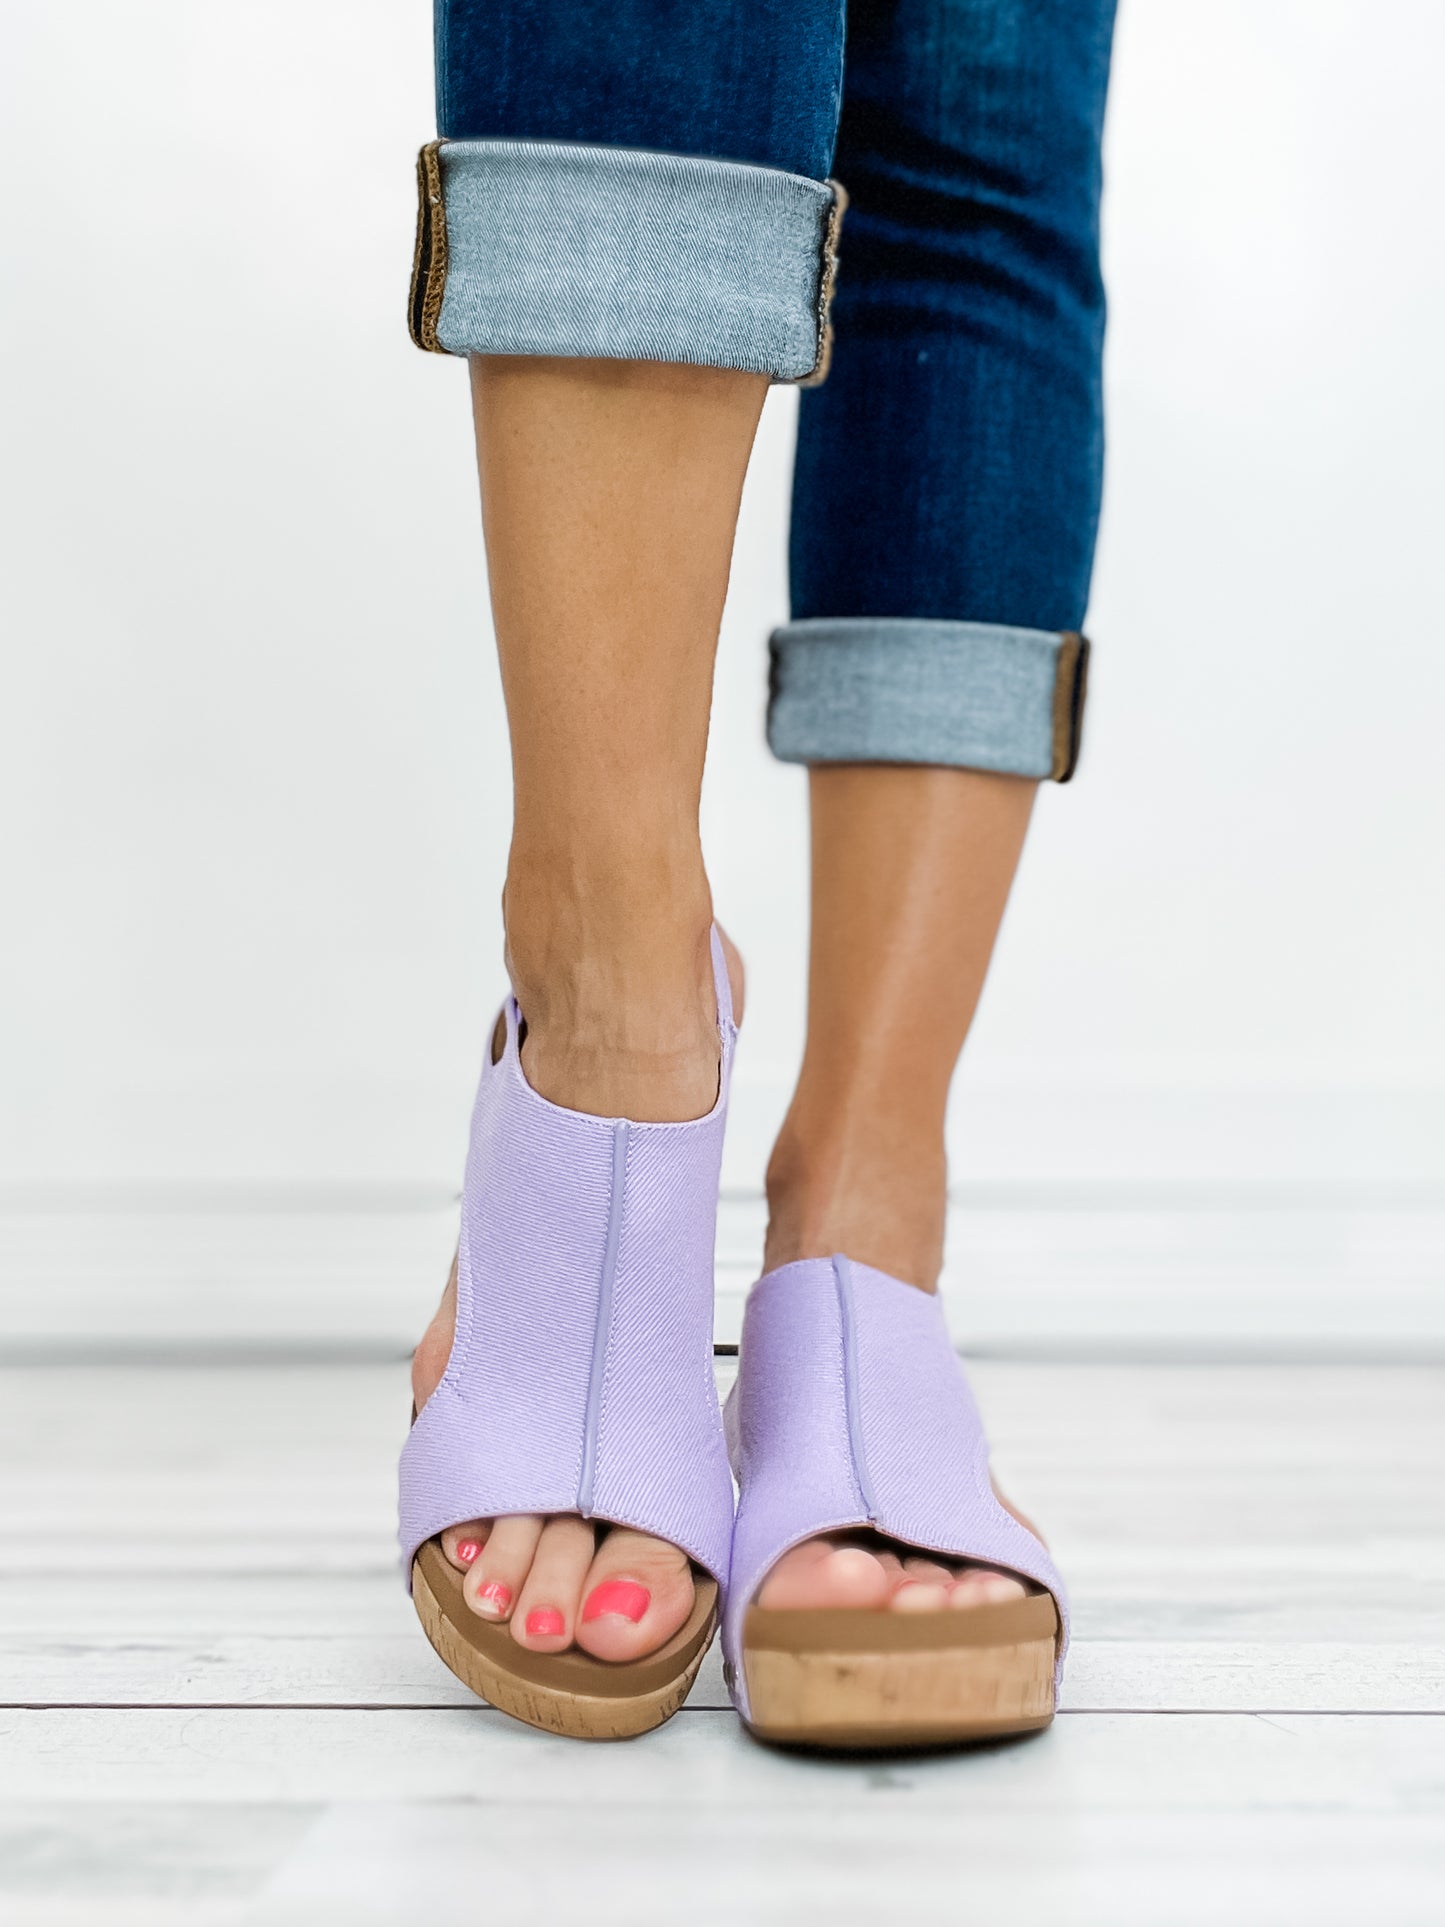 *LIMITED EDITION* Corky's Carley Lavender Canvas Wedge Shoe